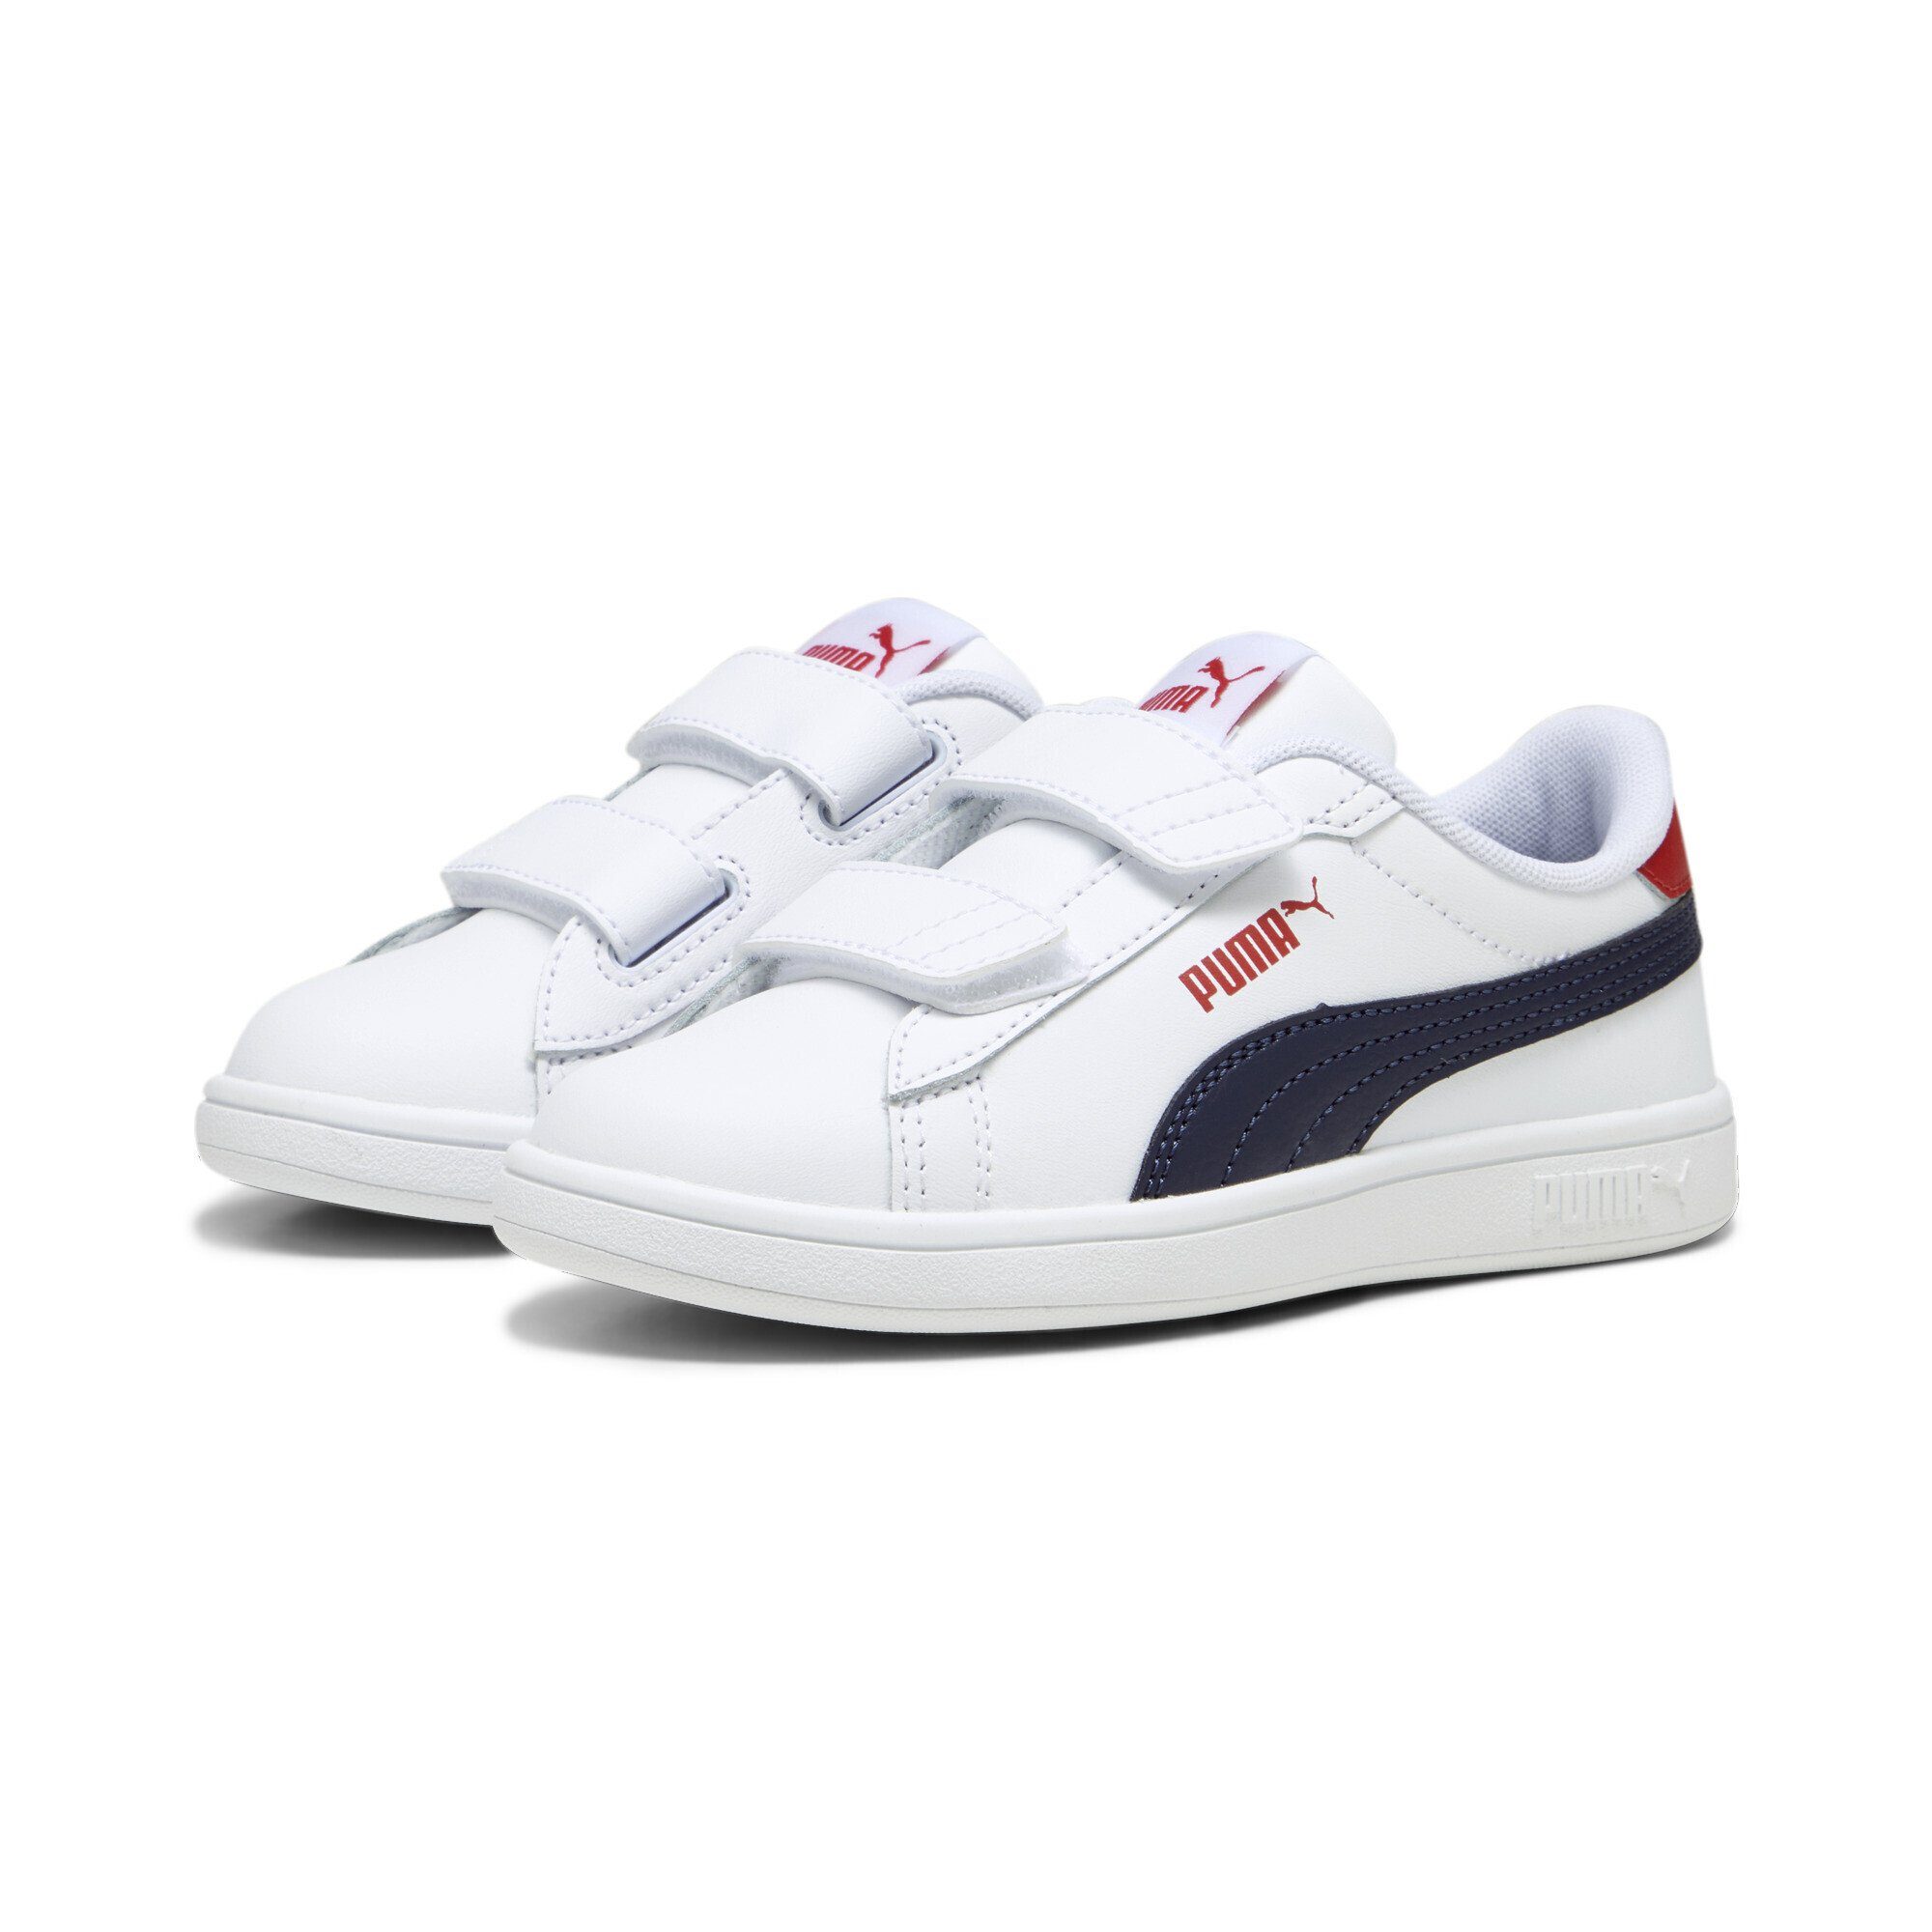 PUMA Smash 3.0 Leather Sneakers Sneaker White Navy For All Time Red Blue